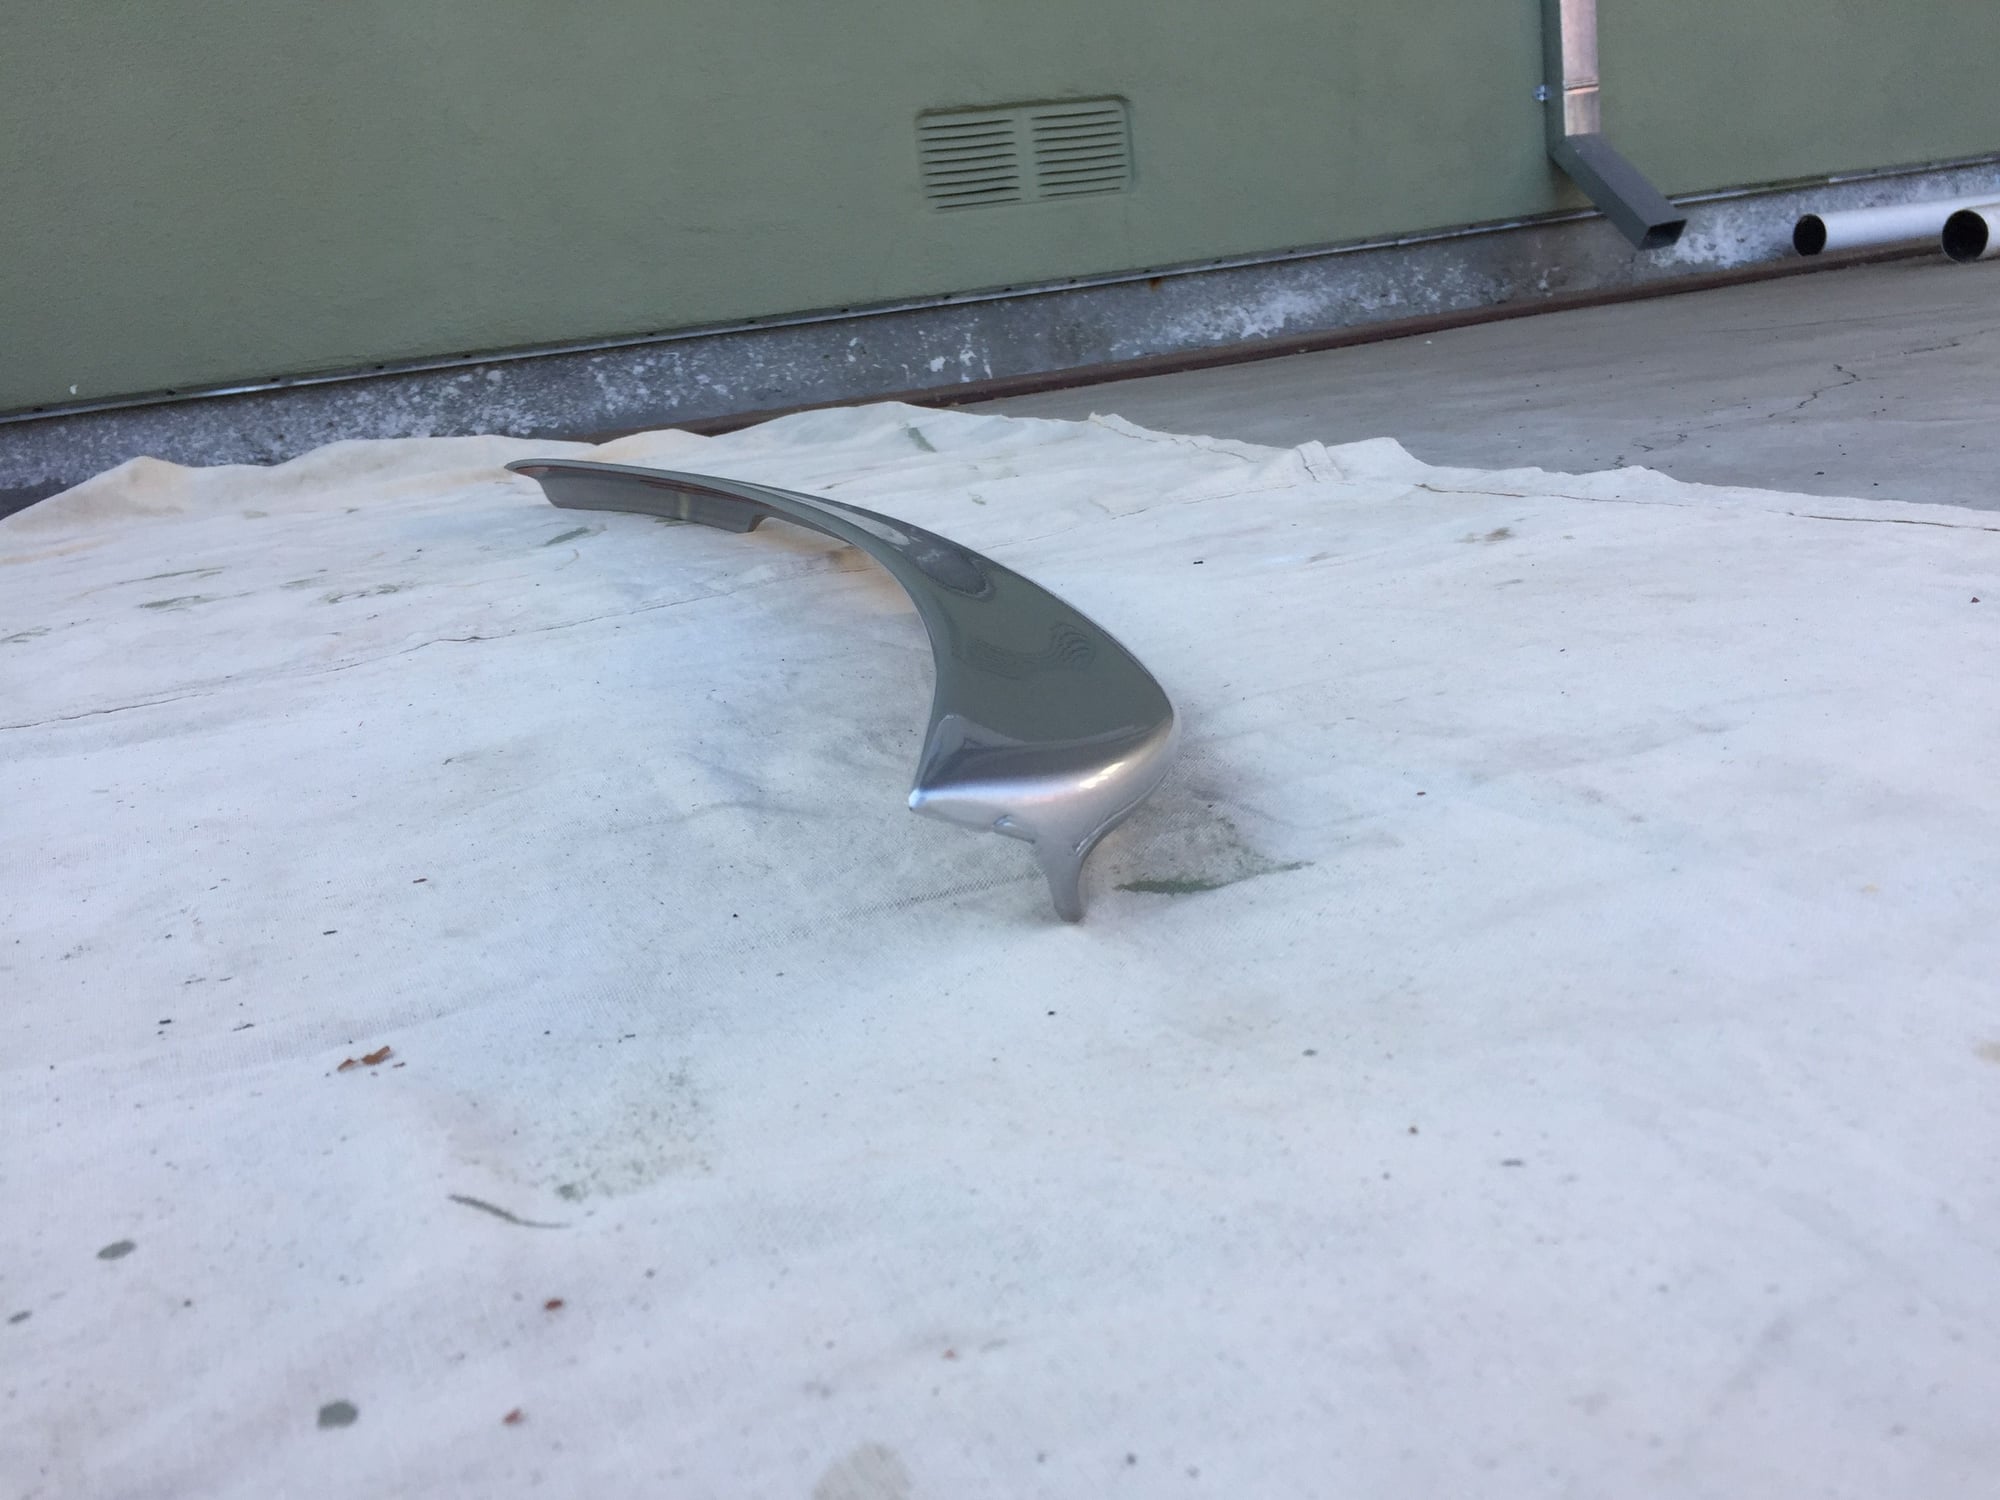 Exterior Body Parts - 2003 - 2006 e55 OEM Front, Rear, side skirts, spoiler for sale - $2000 - Used - 2003 to 2006 Mercedes-Benz E55 AMG - Oakland, CA 94619, United States